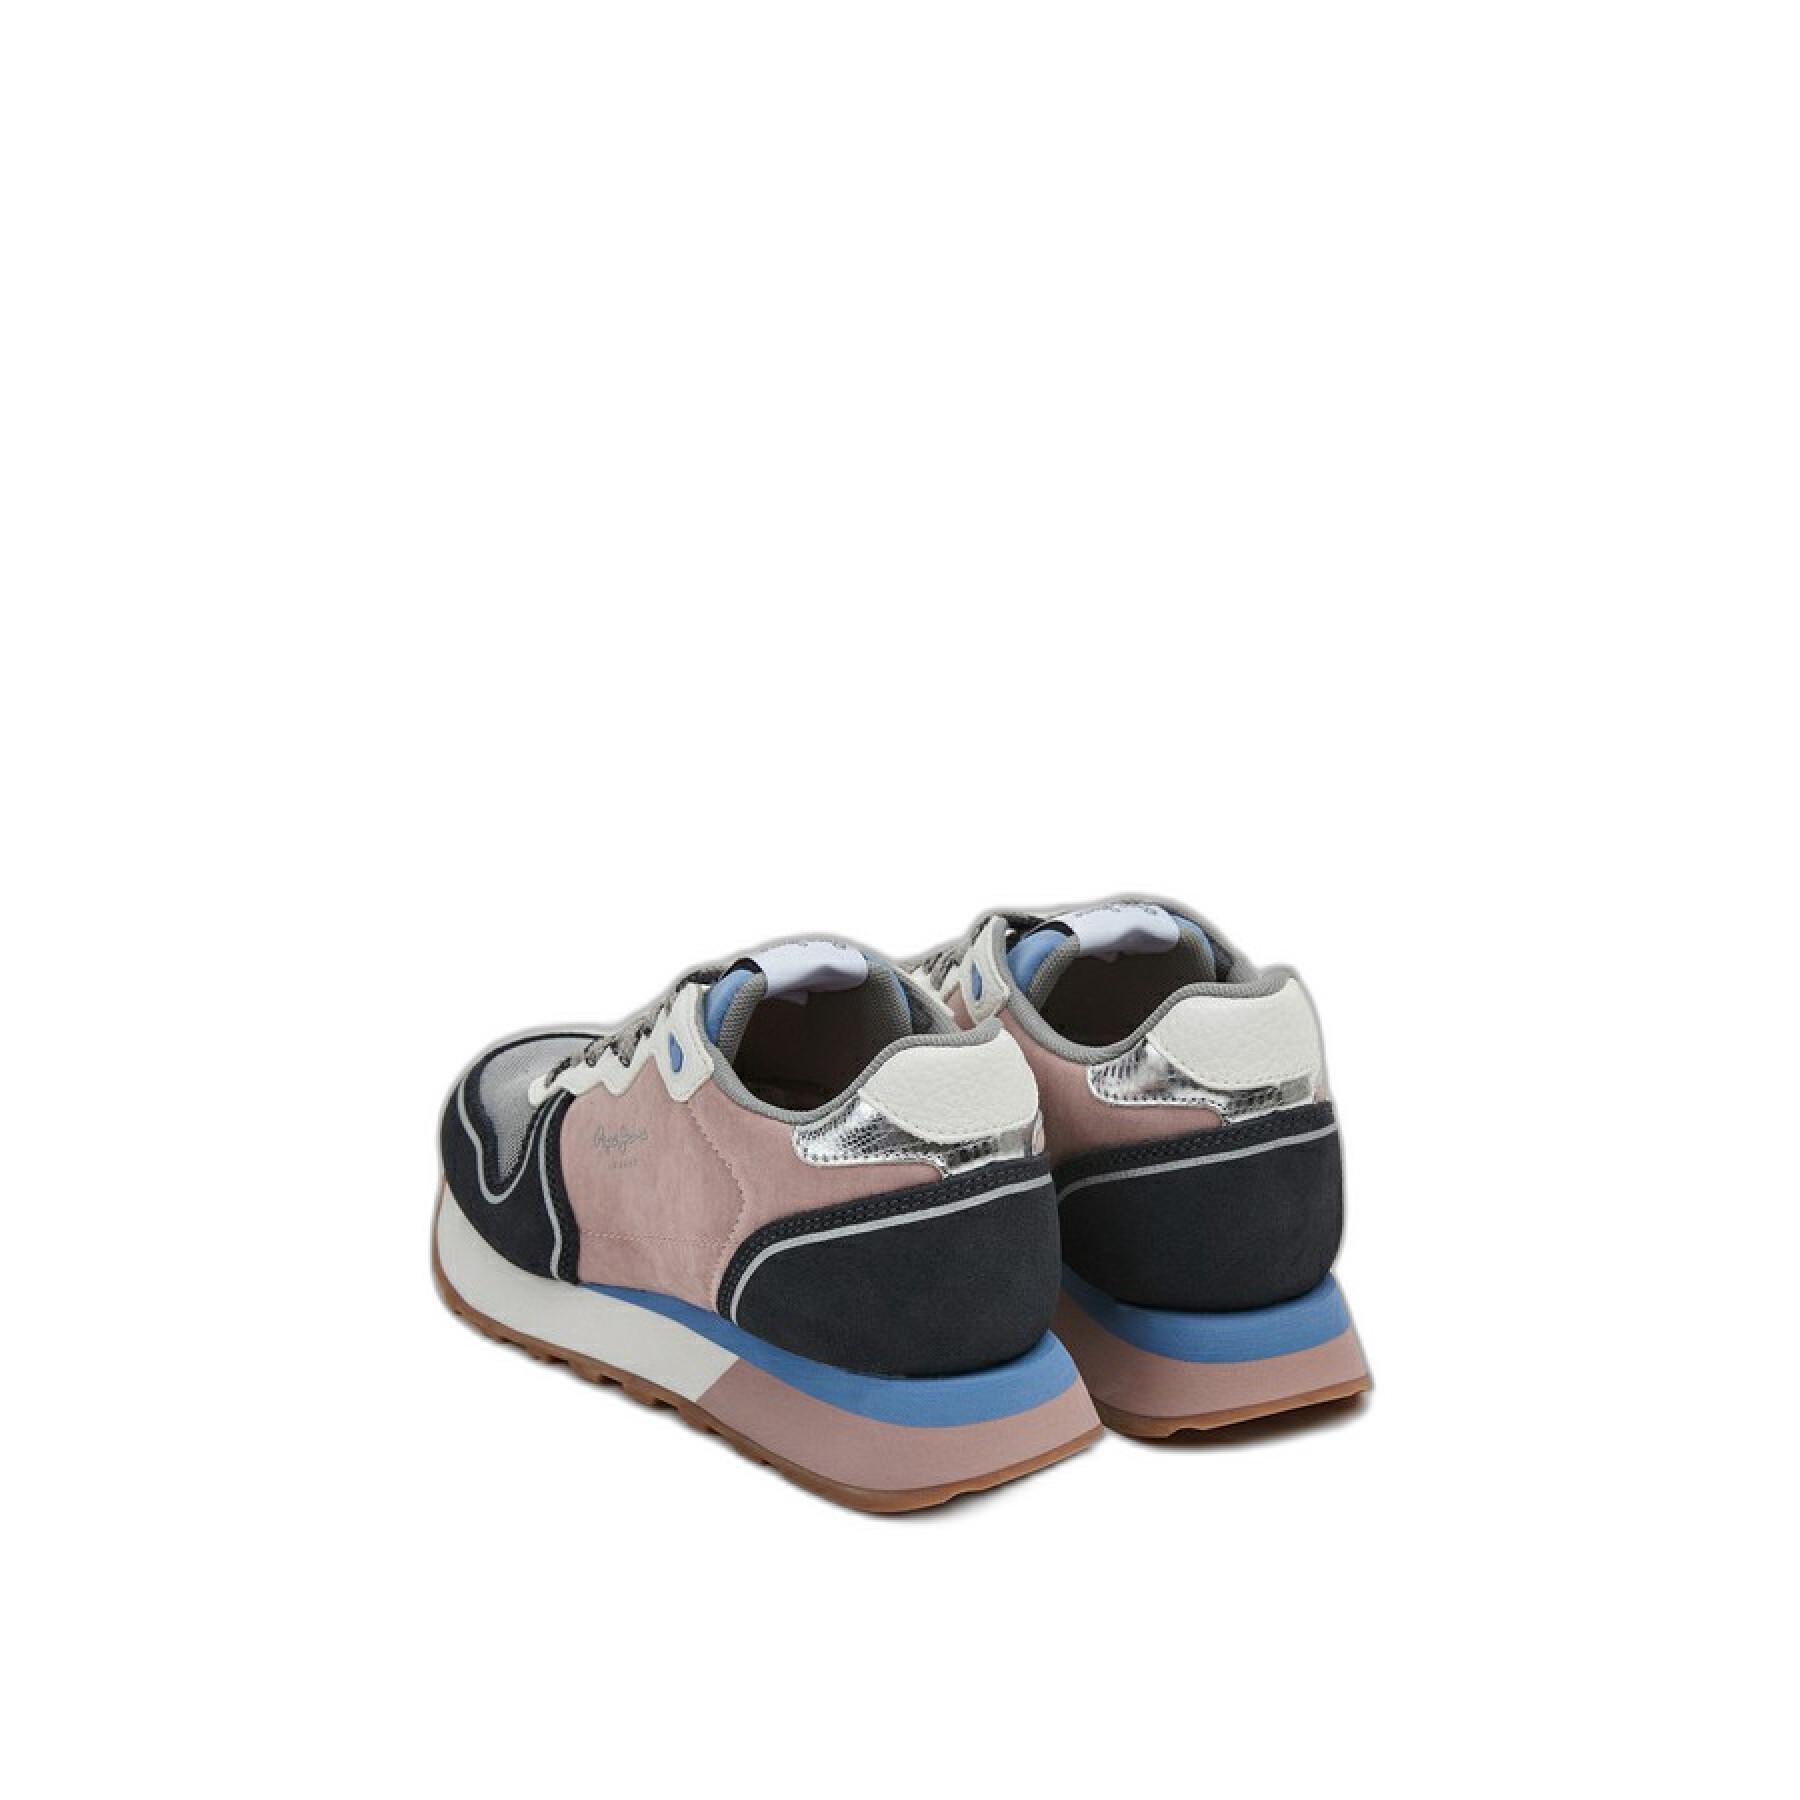 Sneakers Pepe Jeans Dover Renew